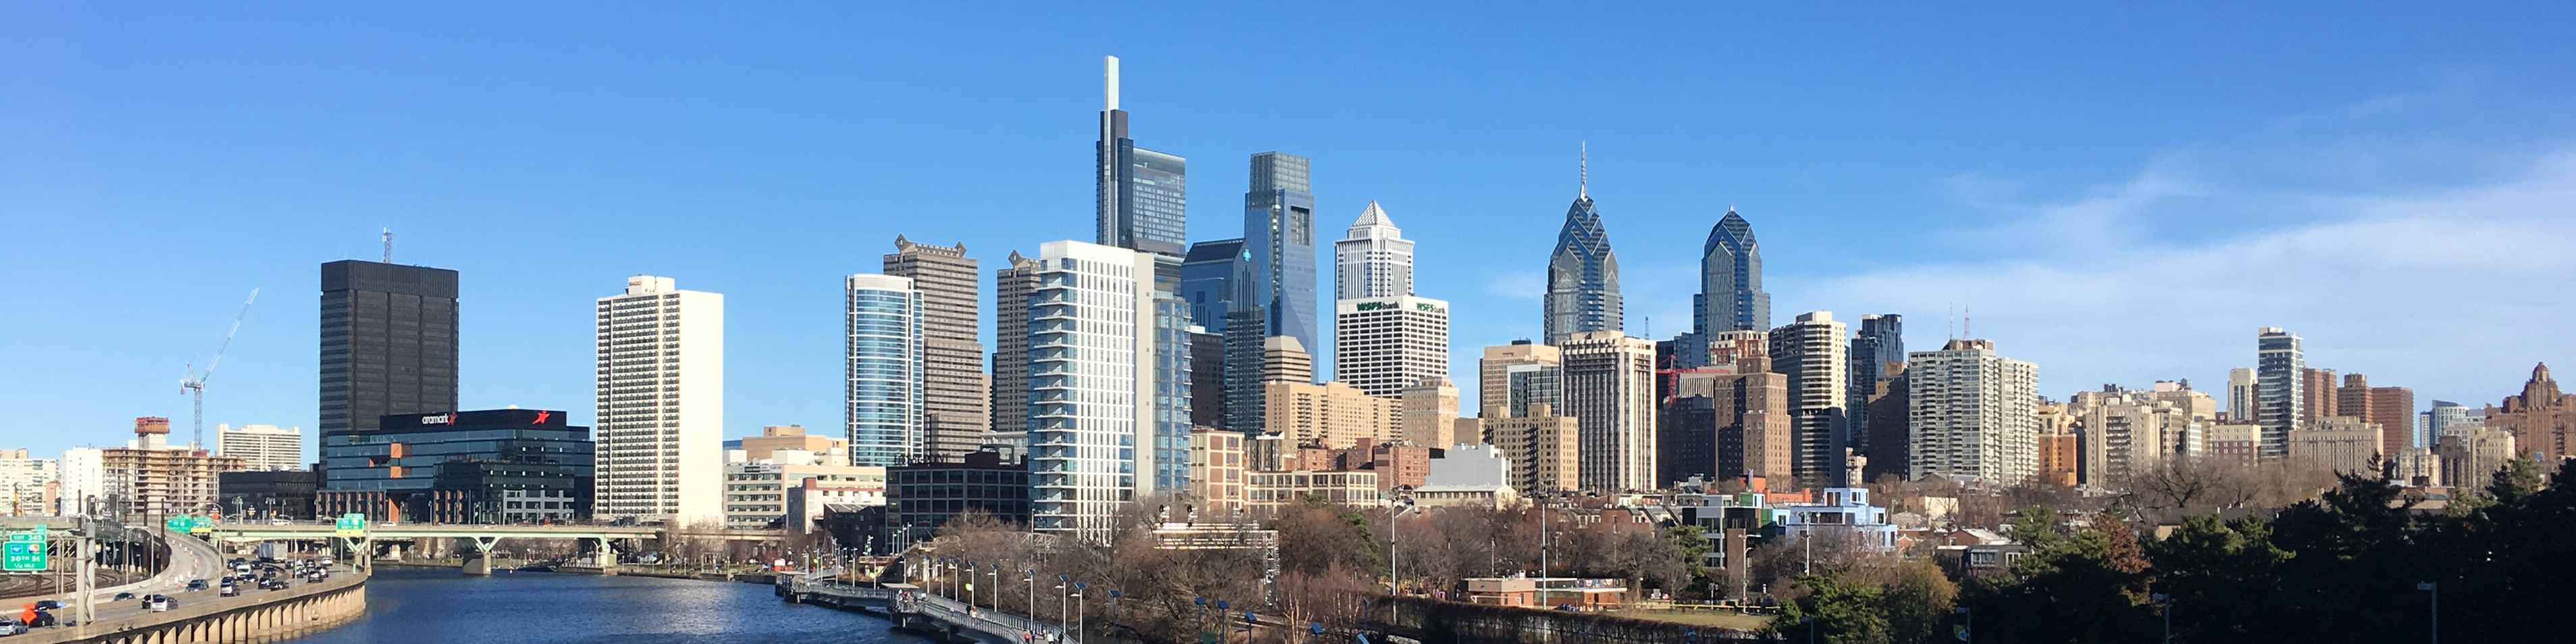 The skyline of Philadelphia, Pennsylvania viewed from the South Street Bridge over the Schuylkill River